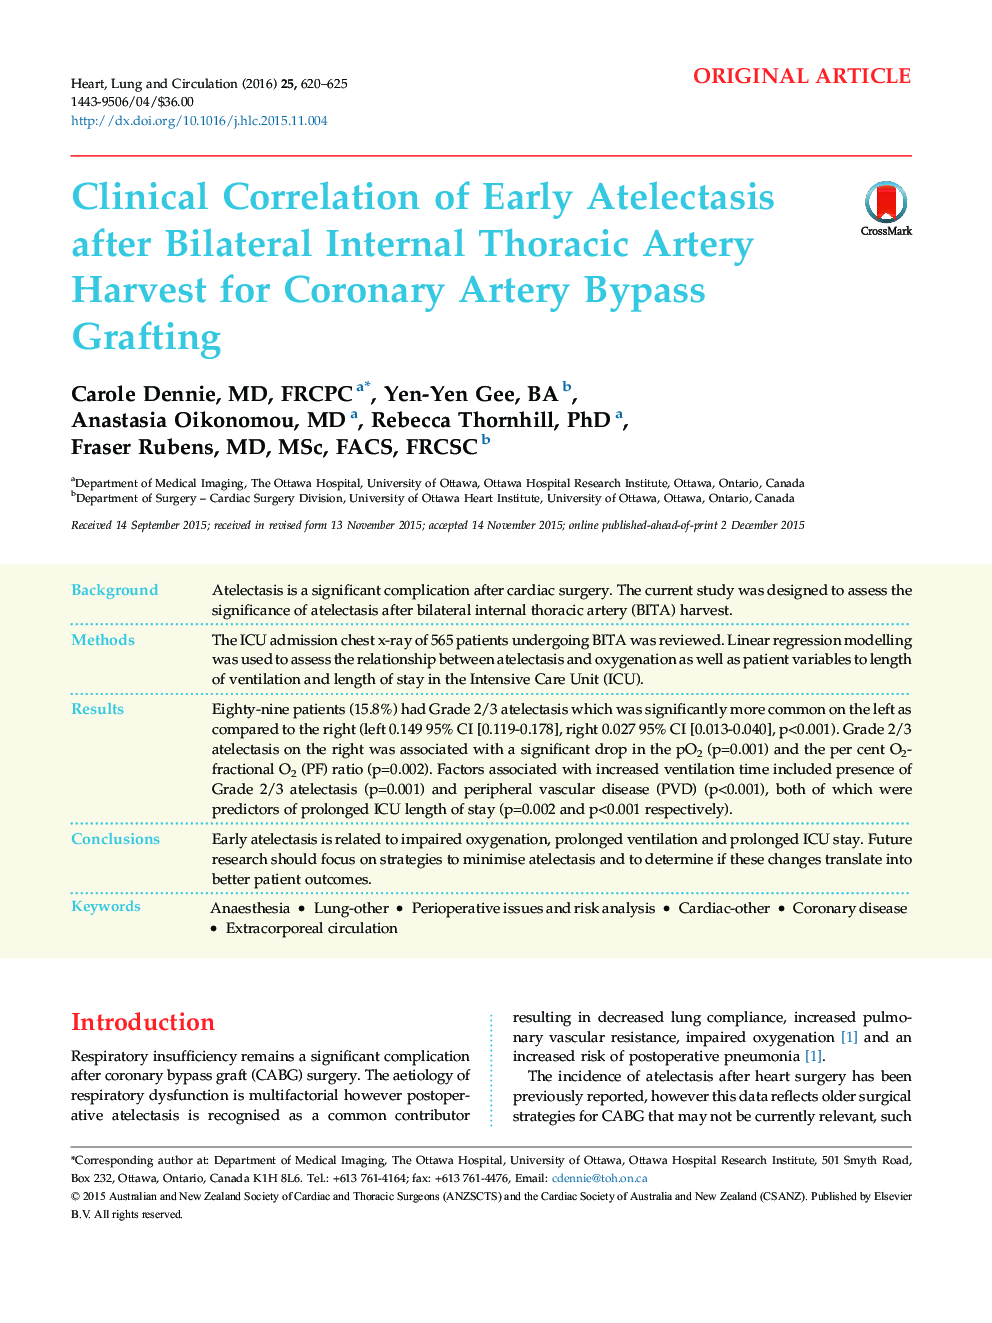 Clinical Correlation of Early Atelectasis after Bilateral Internal Thoracic Artery Harvest for Coronary Artery Bypass Grafting